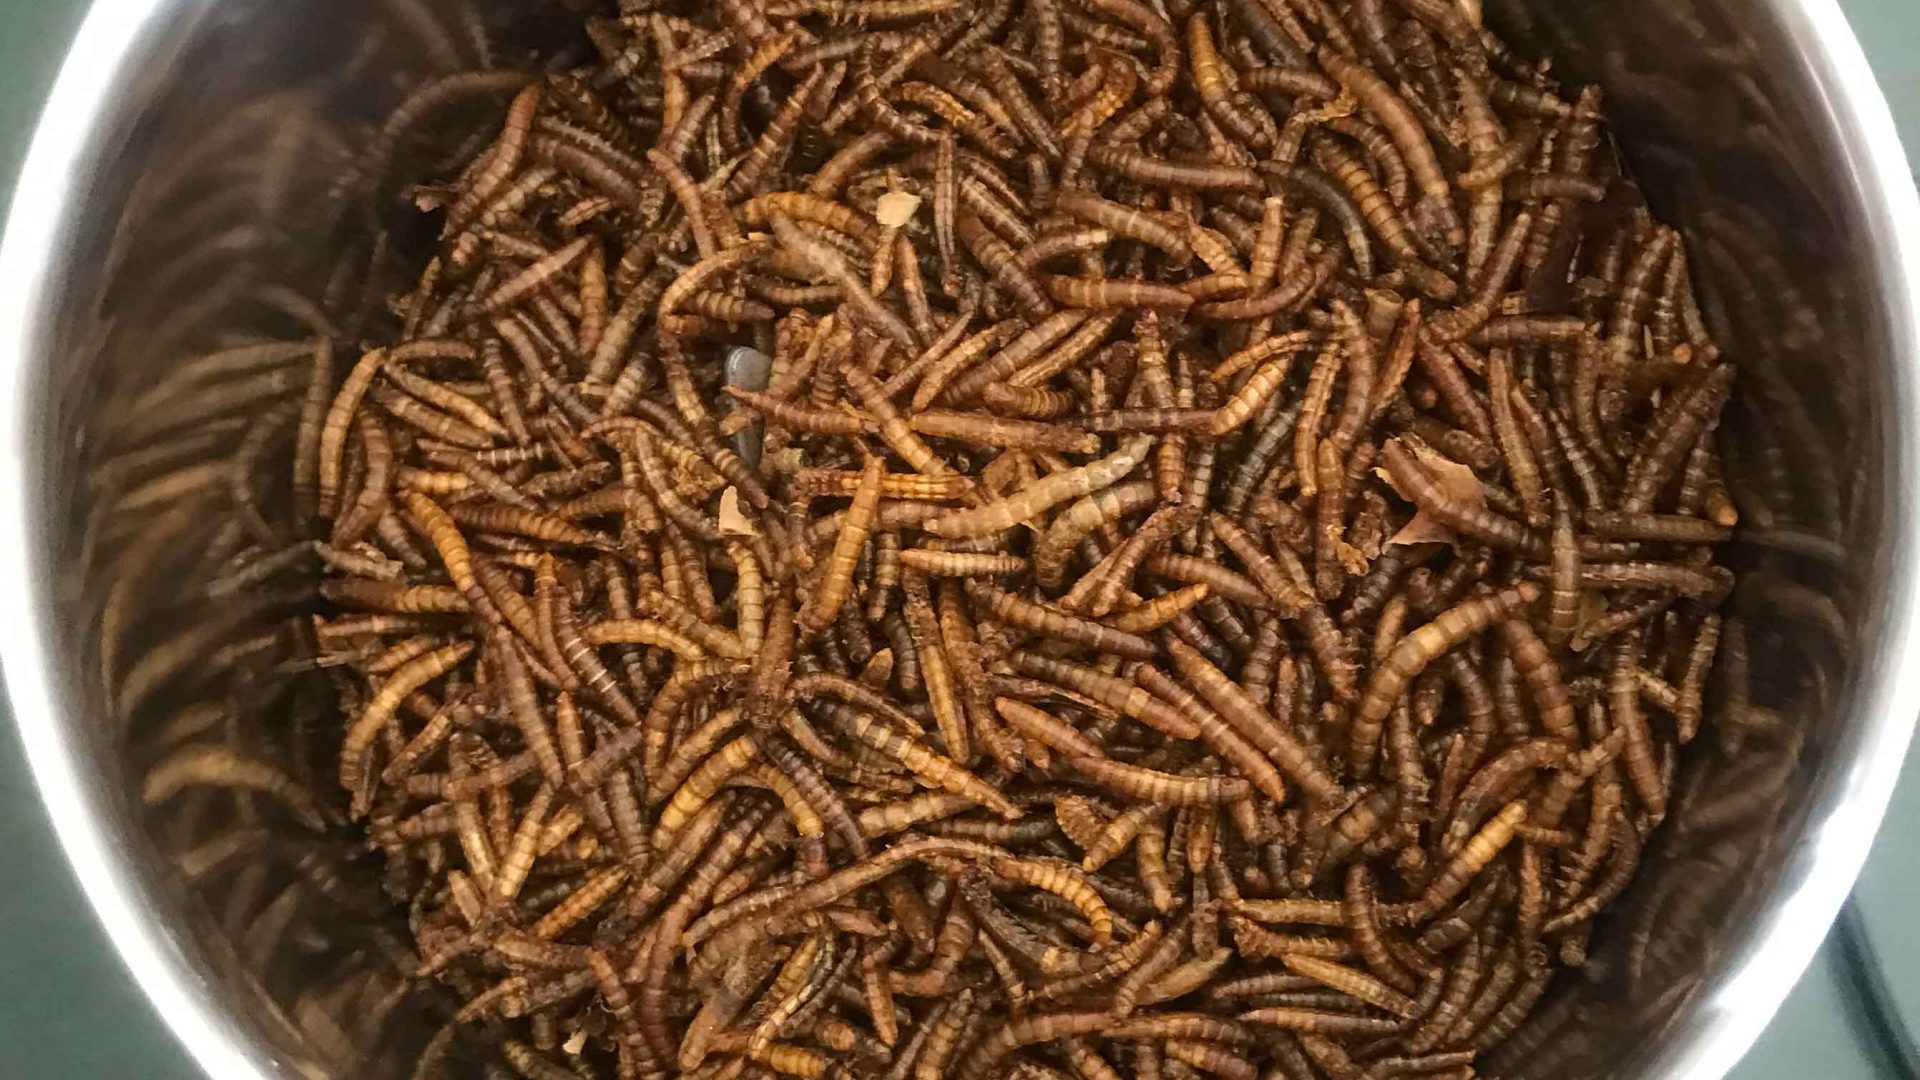 A bowl of mealworms.